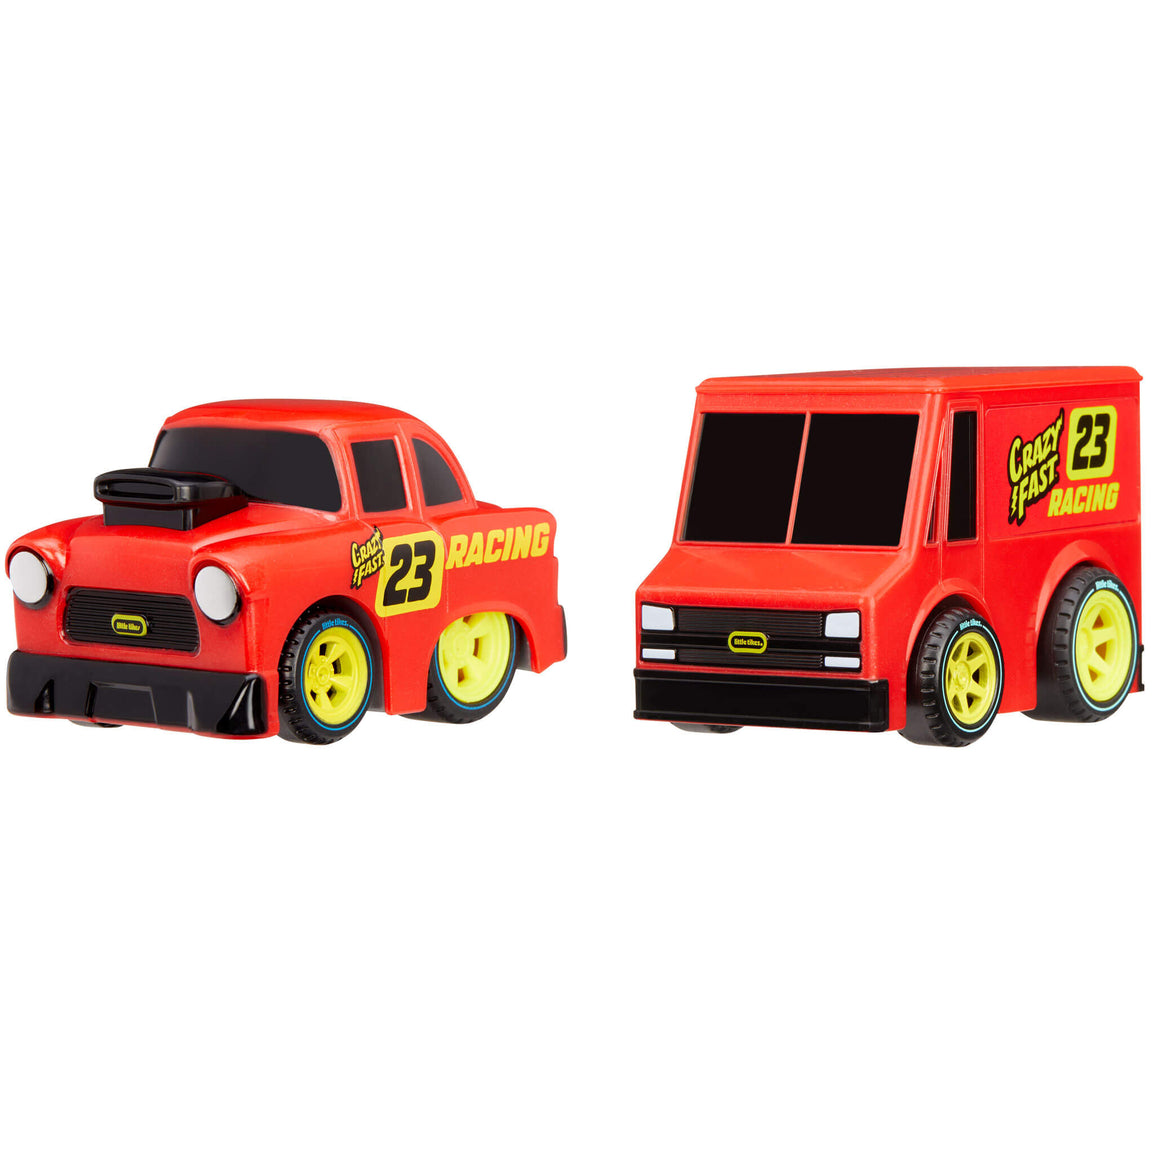 Crazy Fast™ Cars 2 Pack Series 3 - Race Chasers™